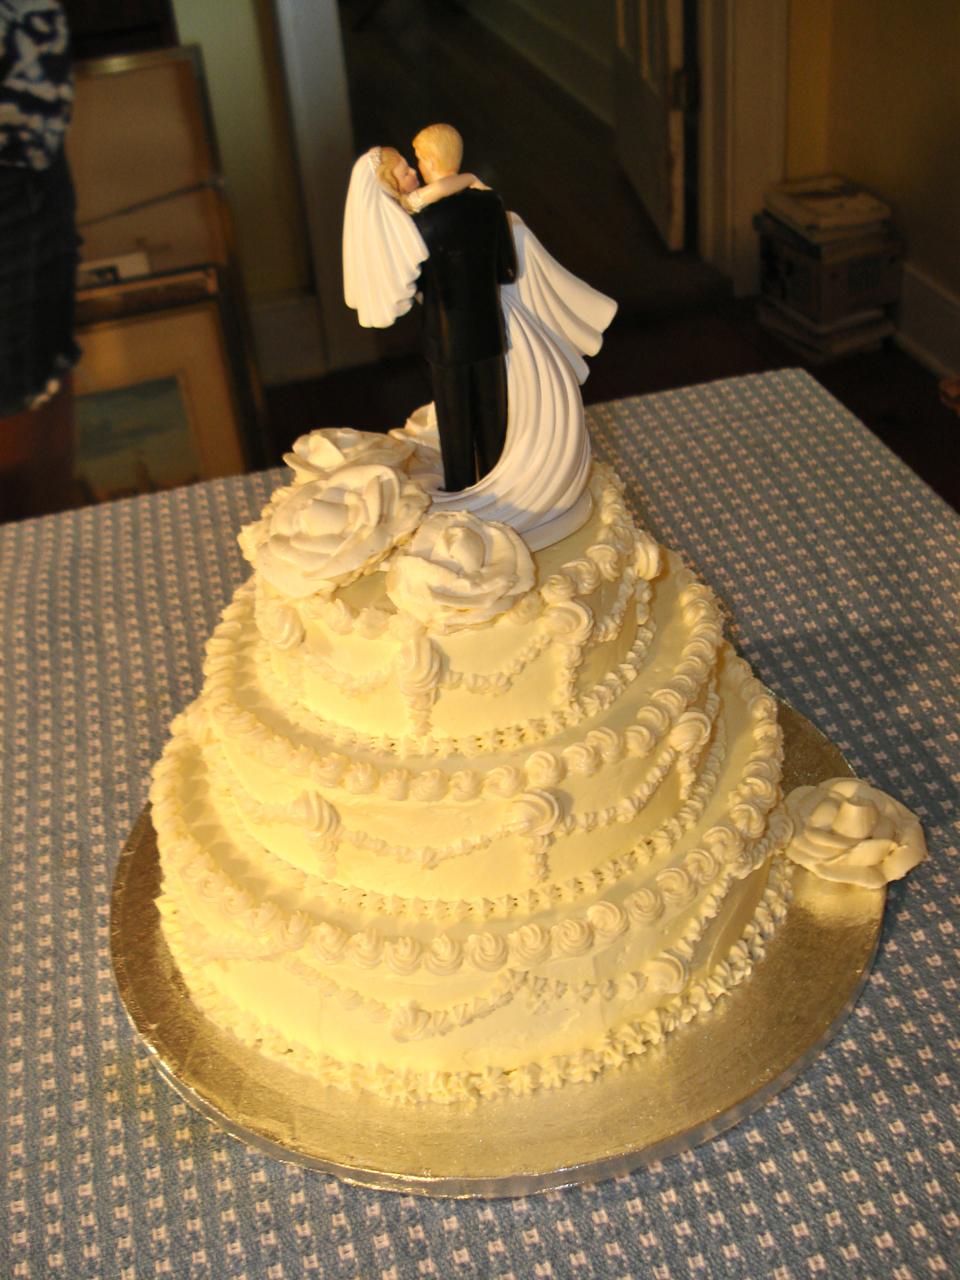 An Old-Fashioned Wedding Cake